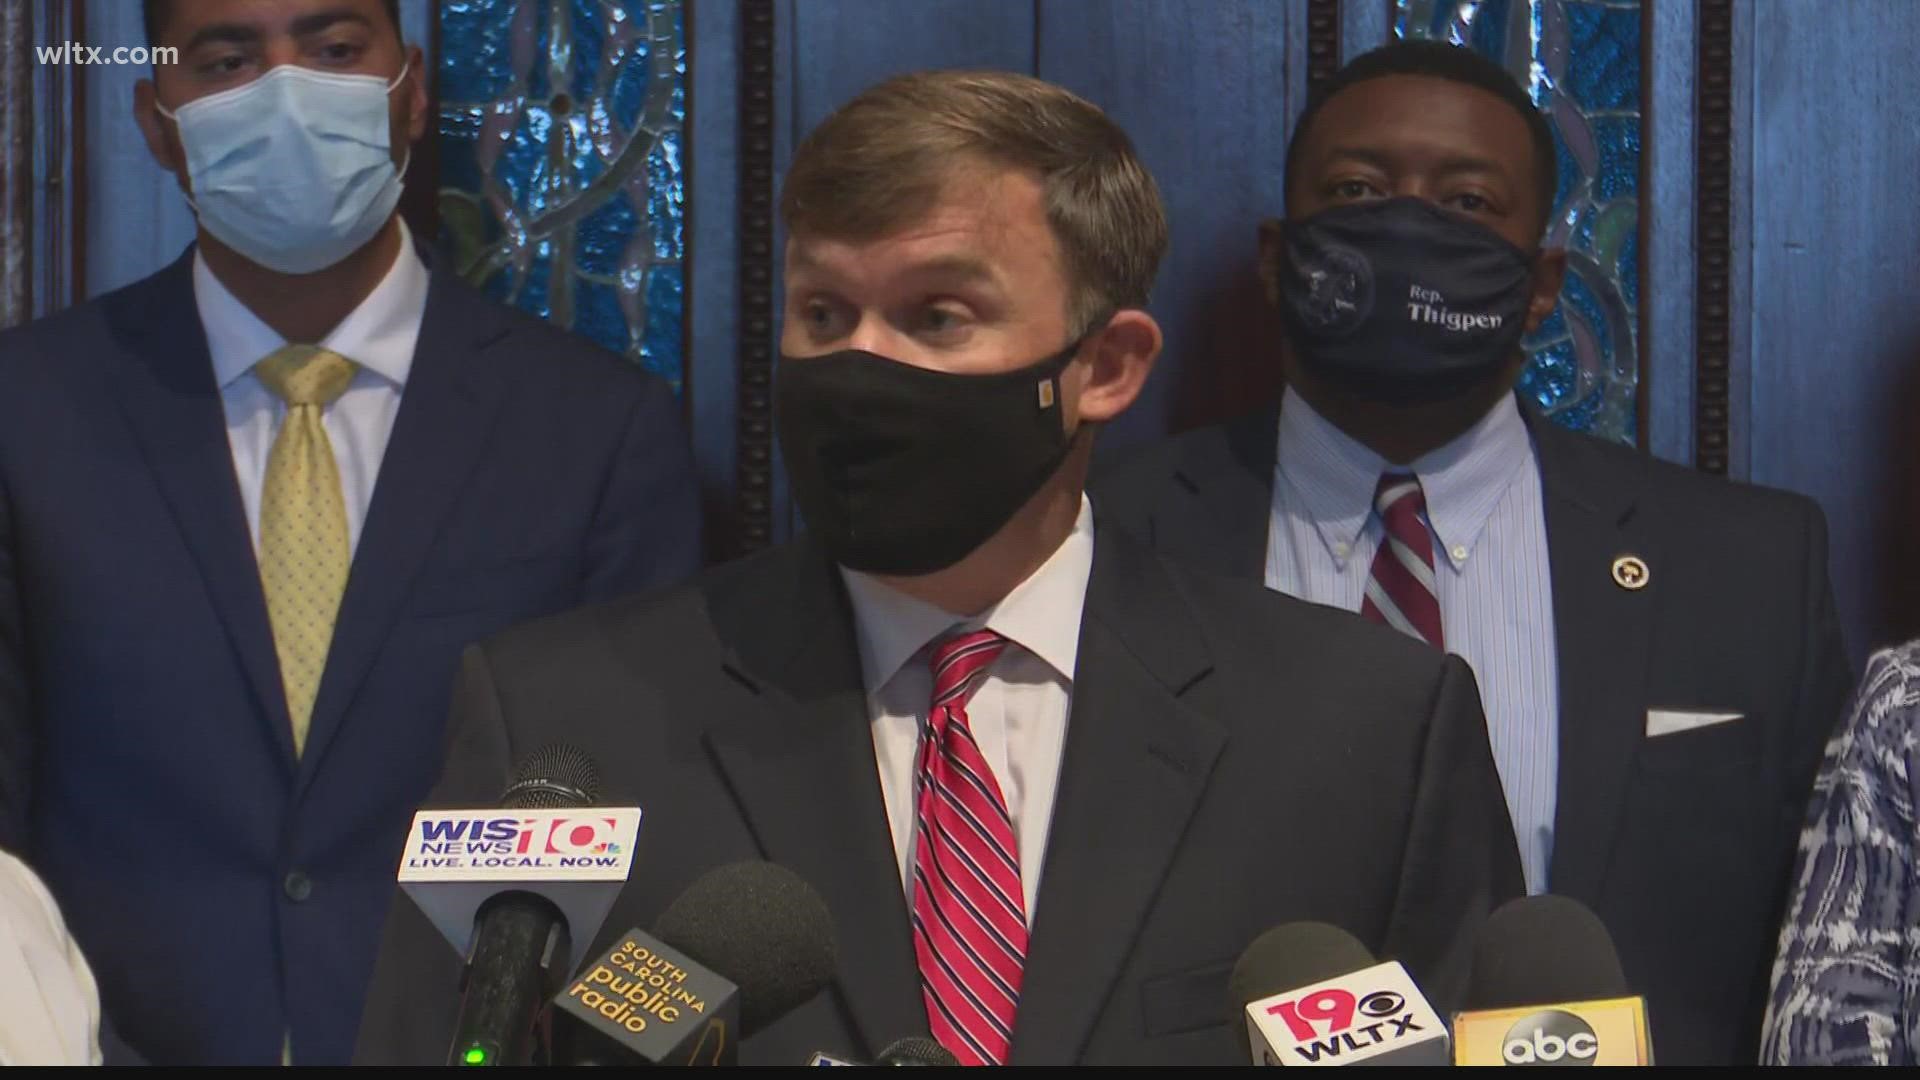 The politicians are asking for a special session so that they can repeal the mask proviso in the budget.